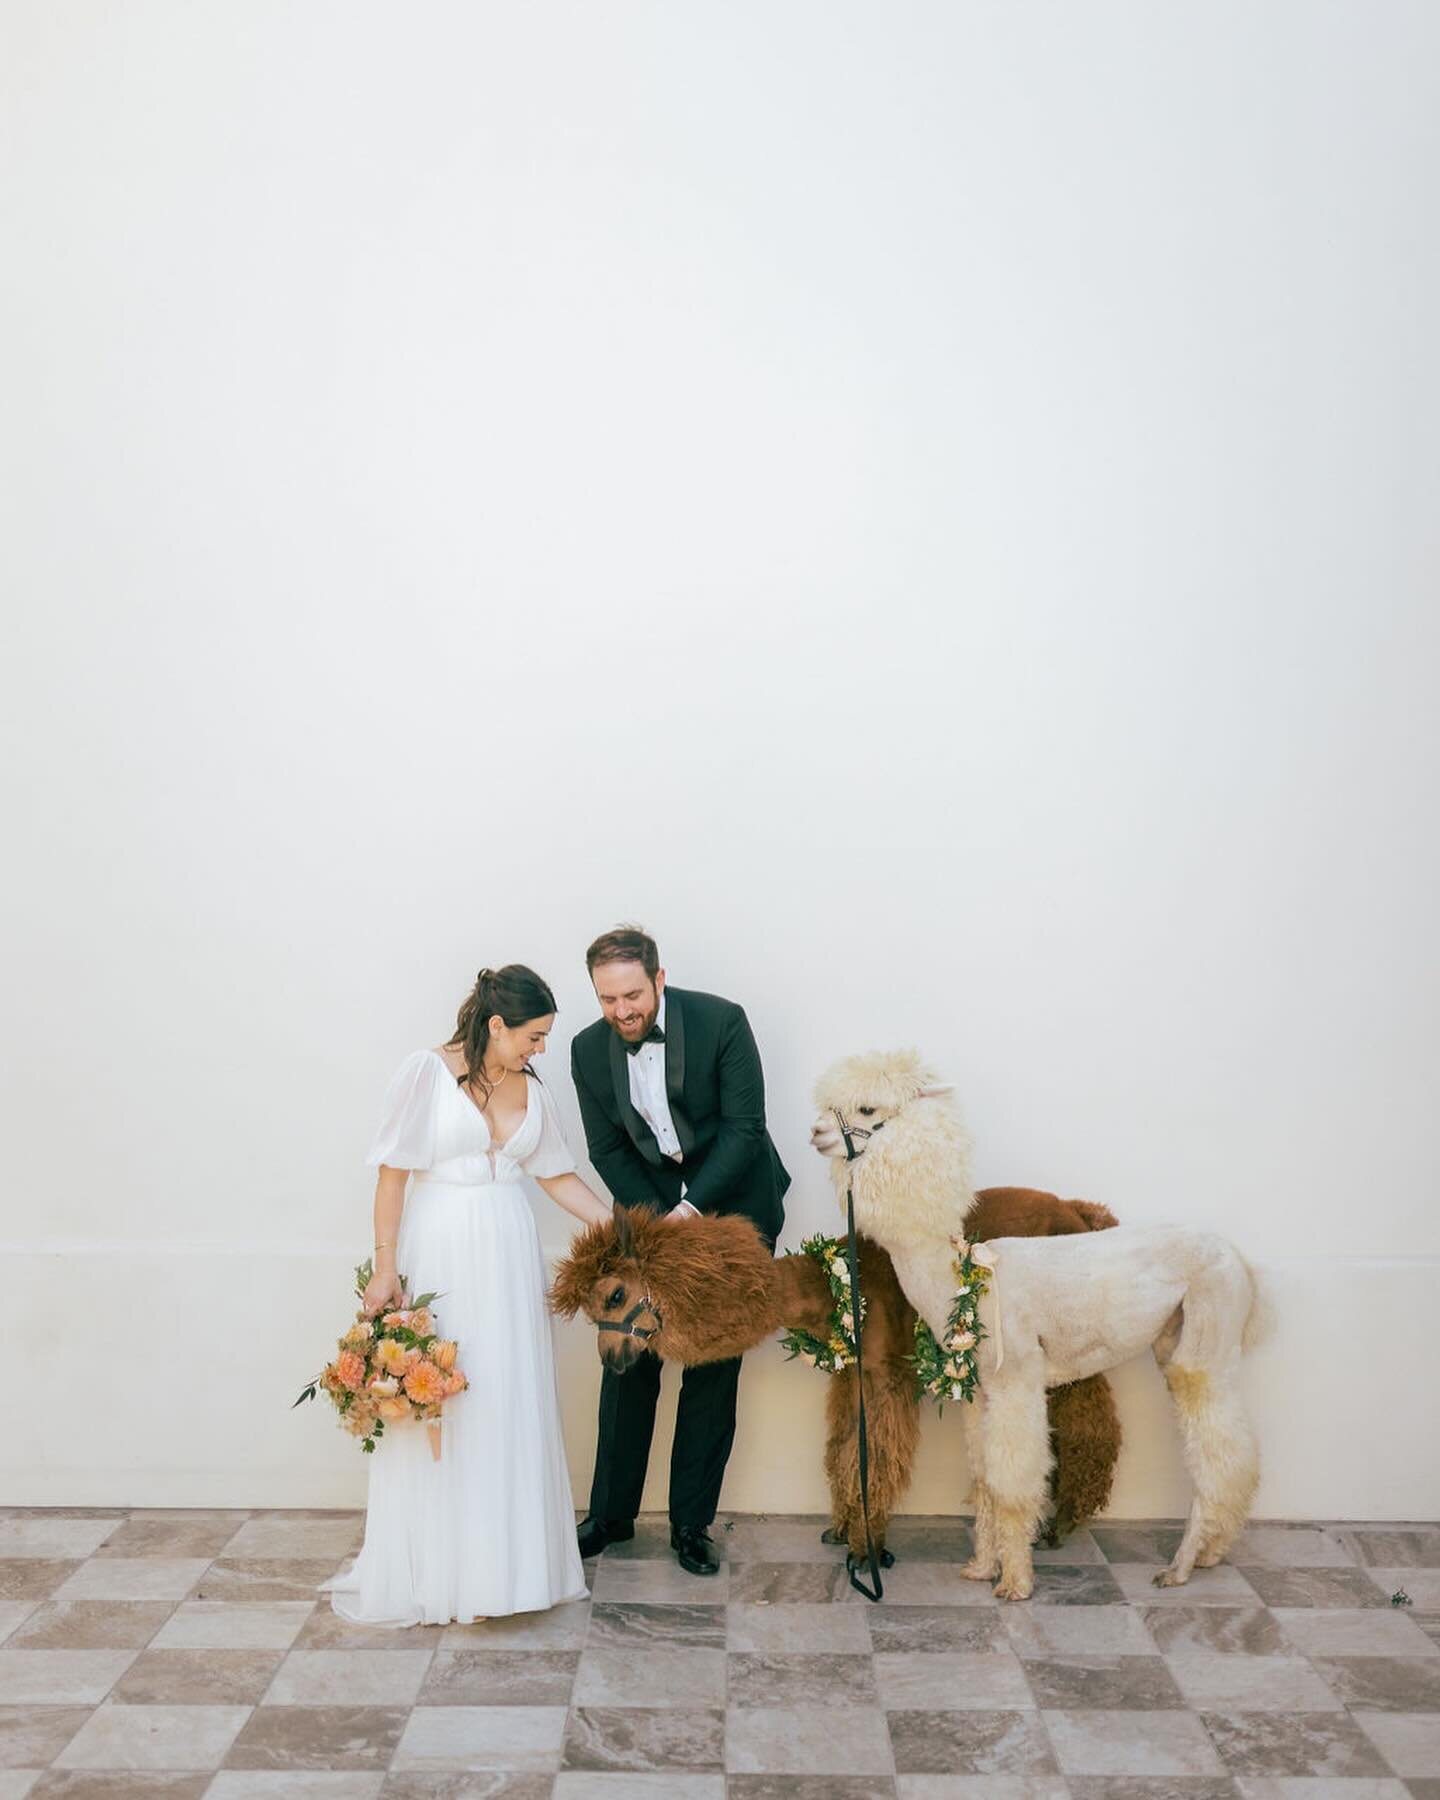 L + I had the best idea to bring these cute alpacas to their mingle with guests during cocktail hour. Guests loved meeting them and so did we 🦙🦙💛
.
Amazing Vendor Team
Photo @aldousphoto 
Video @amariproductions 
Venue @parkhyattaviara_weddings 
P